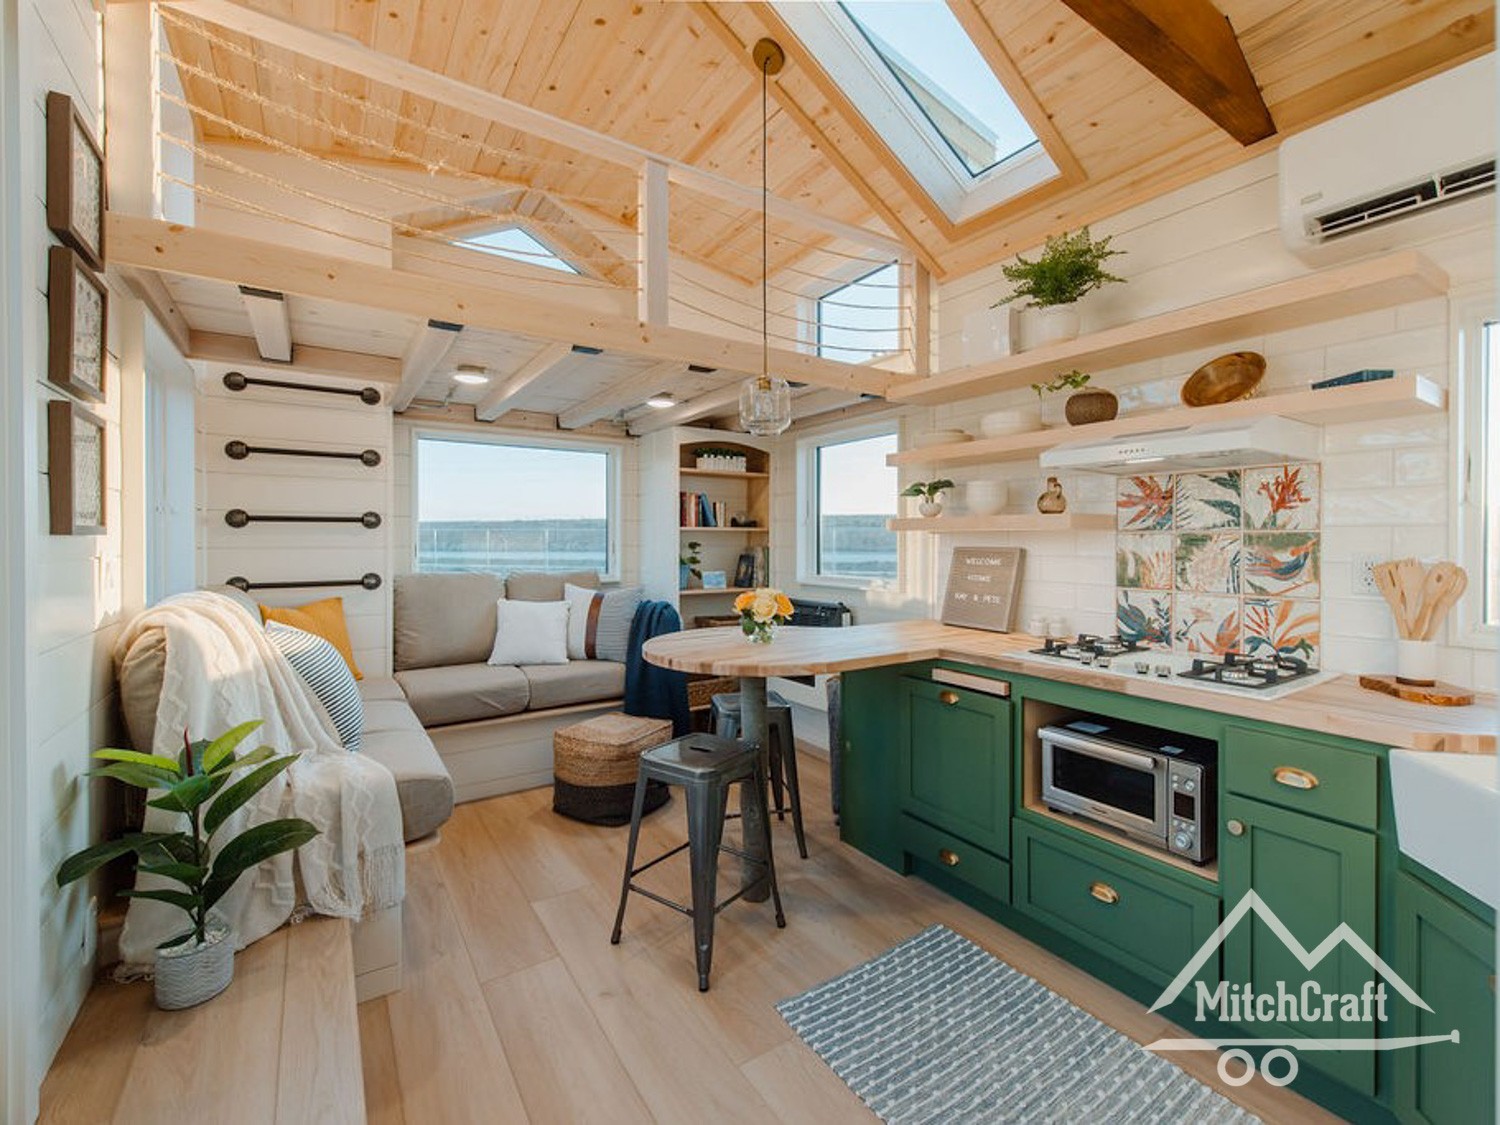 Home Touch: They're big on tiny homes